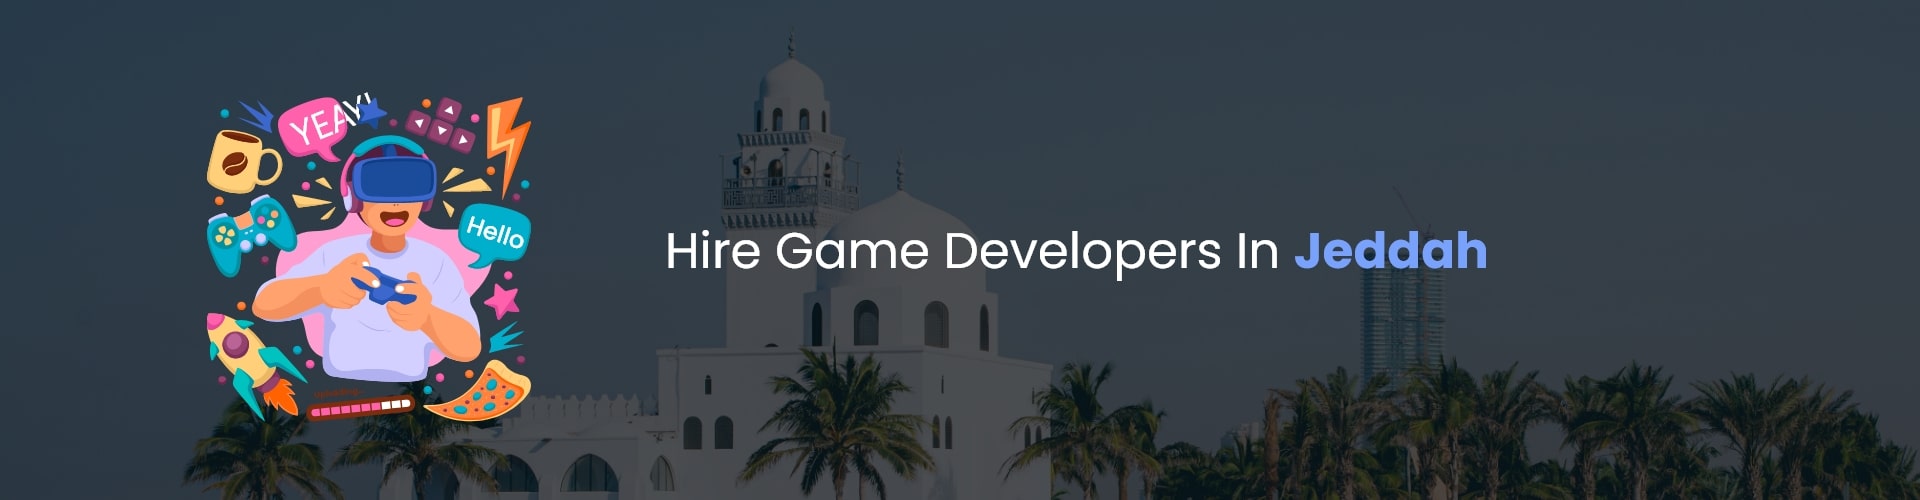 hire game developers in jeddah